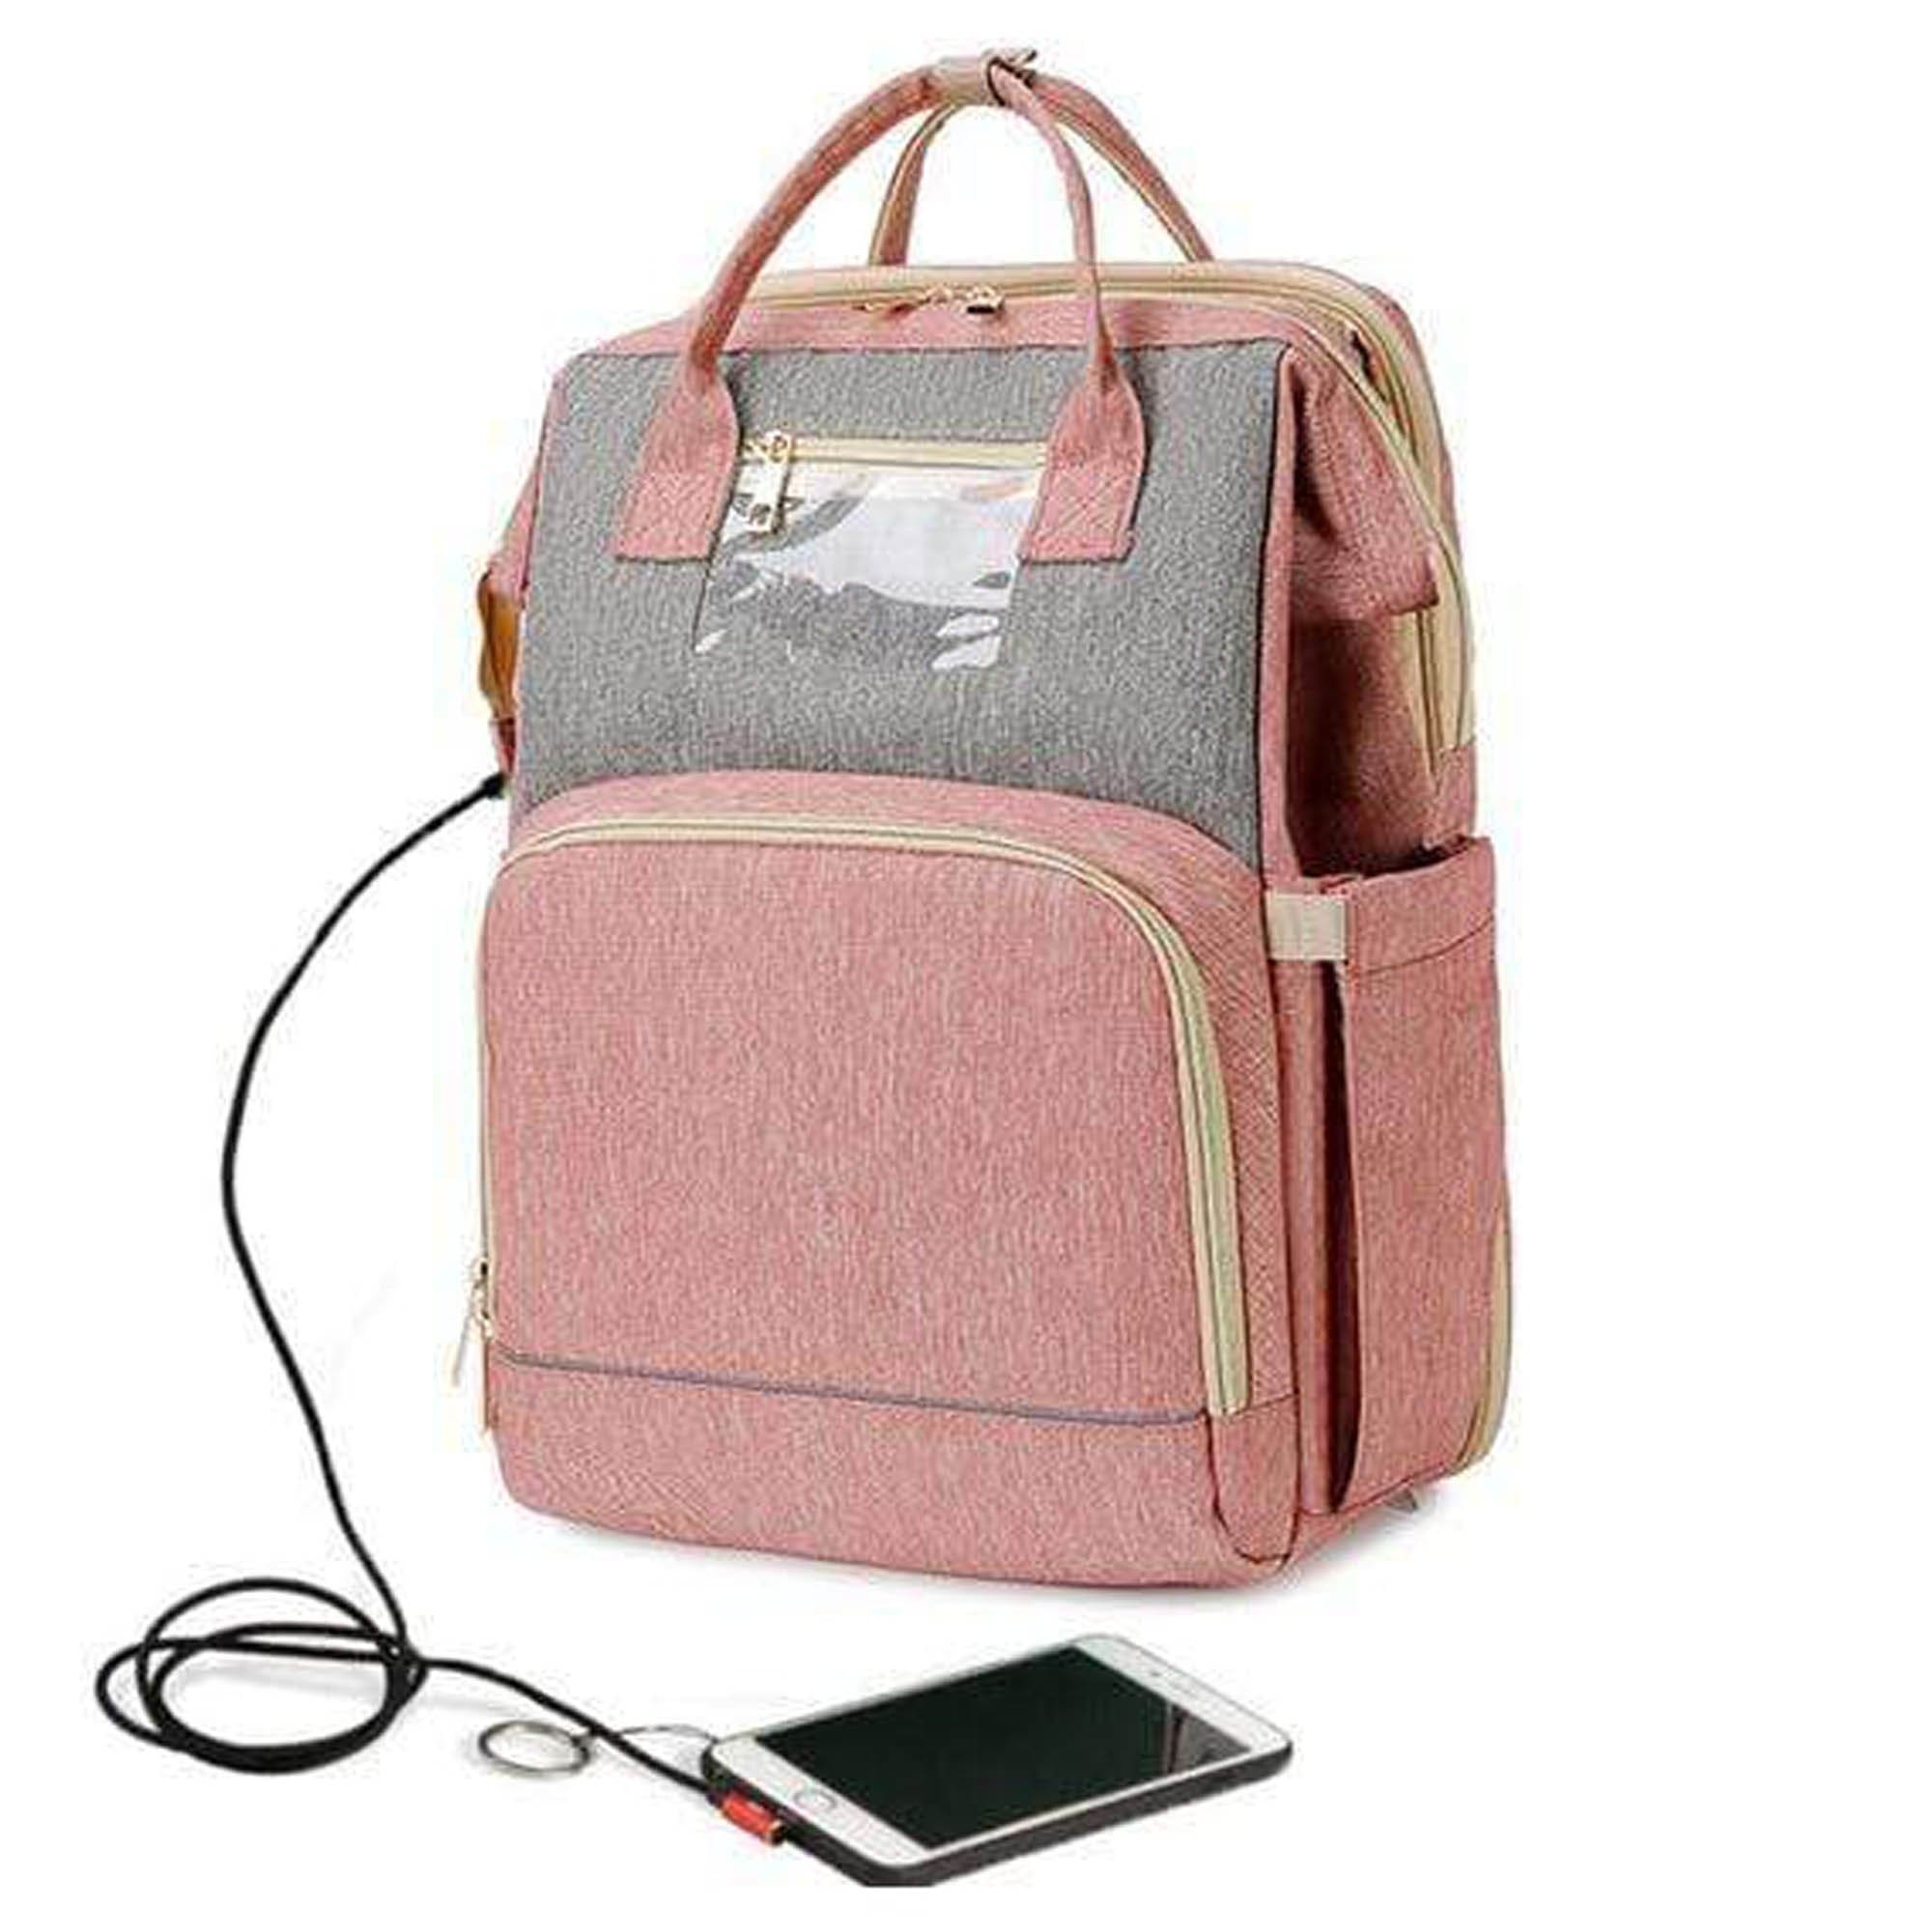 Convertible Diaper Bag Backpack with Portable Changing Station